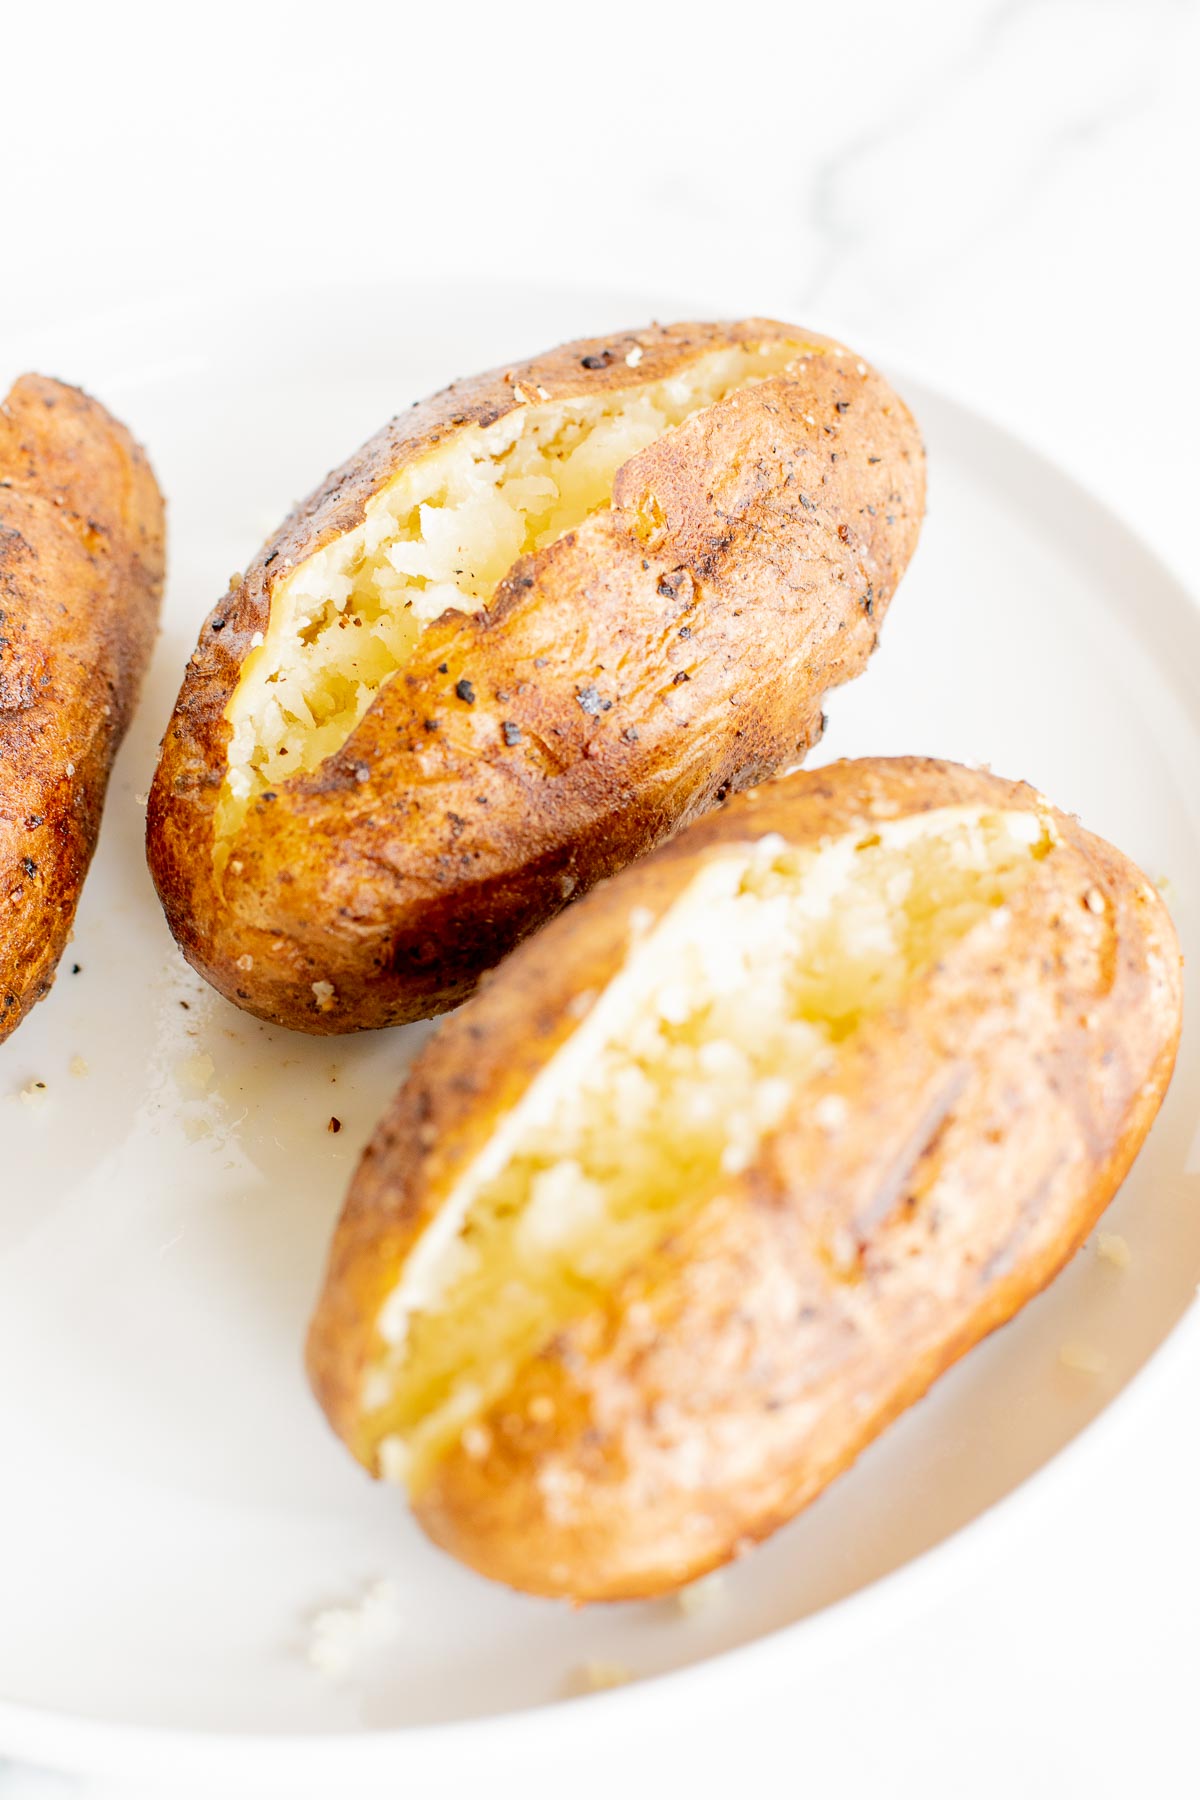 grilled baked potatoes sliced open and placed on a white plate.